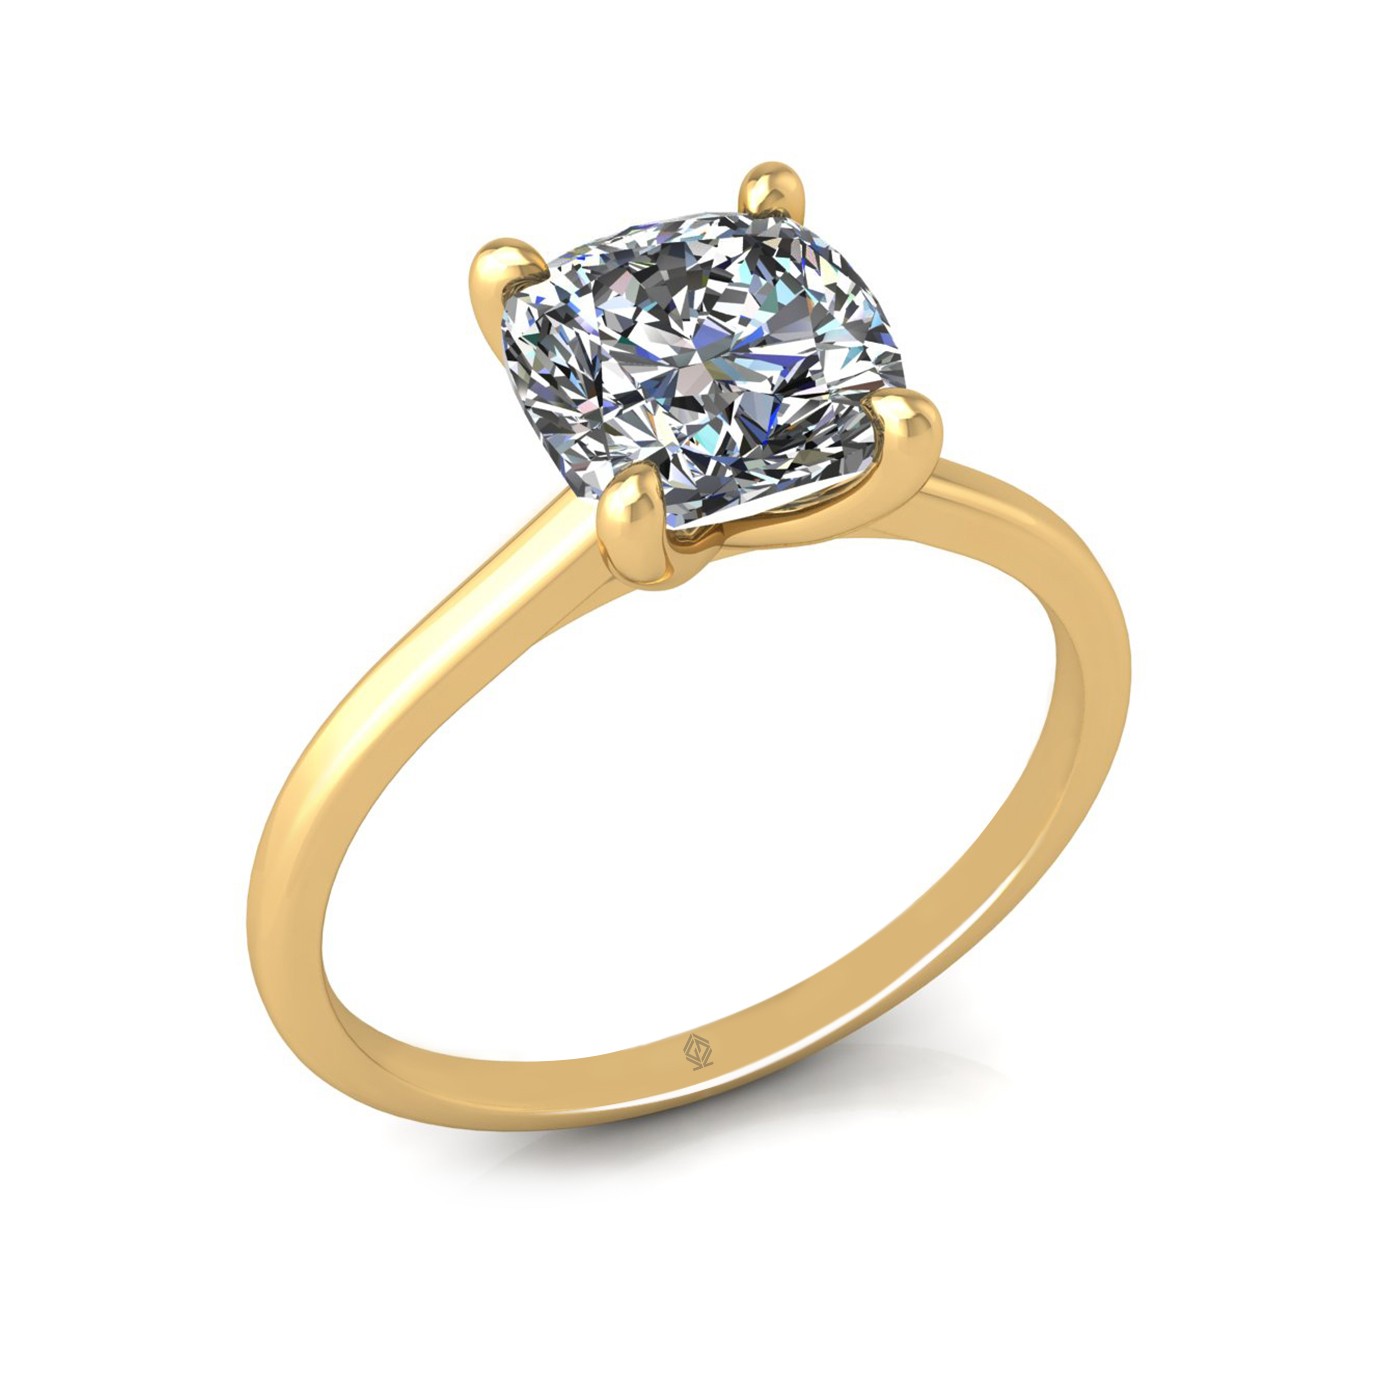 18k yellow gold 2.0ct 4 prongs solitaire cushion cut diamond engagement ring with whisper thin band